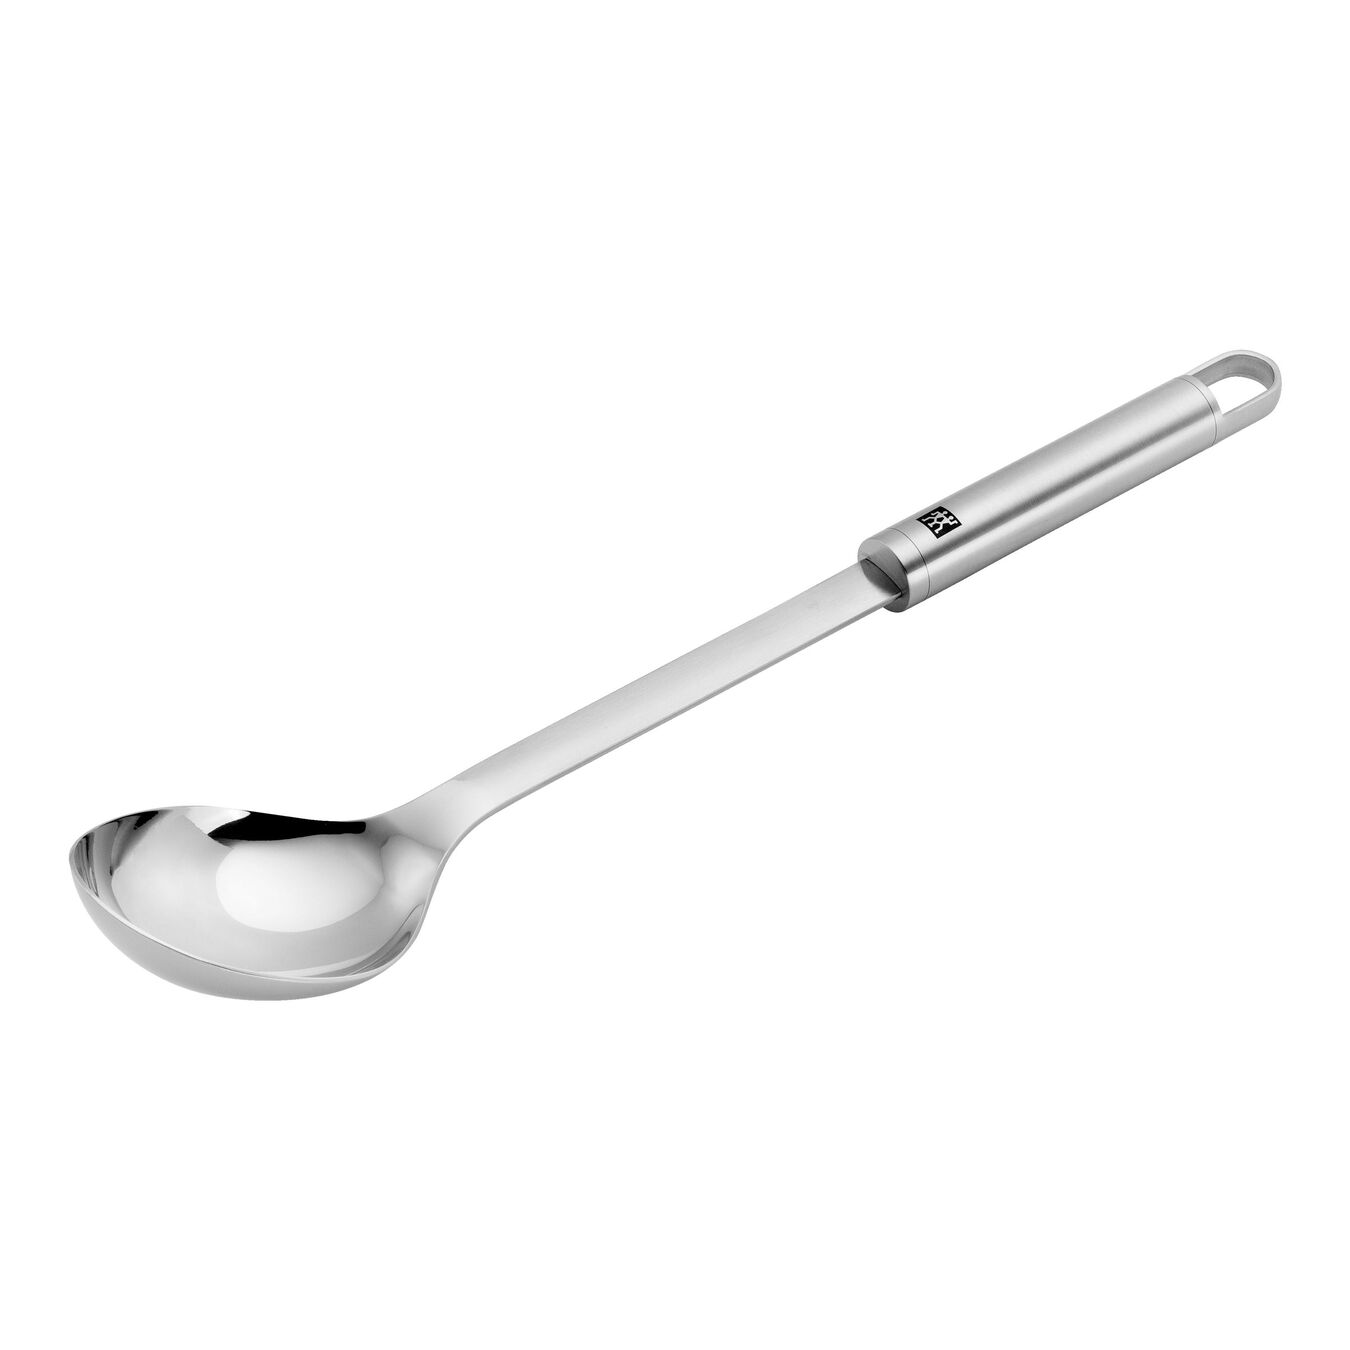 Serving spoon, 35 cm, 18/10 Stainless Steel,,large 1